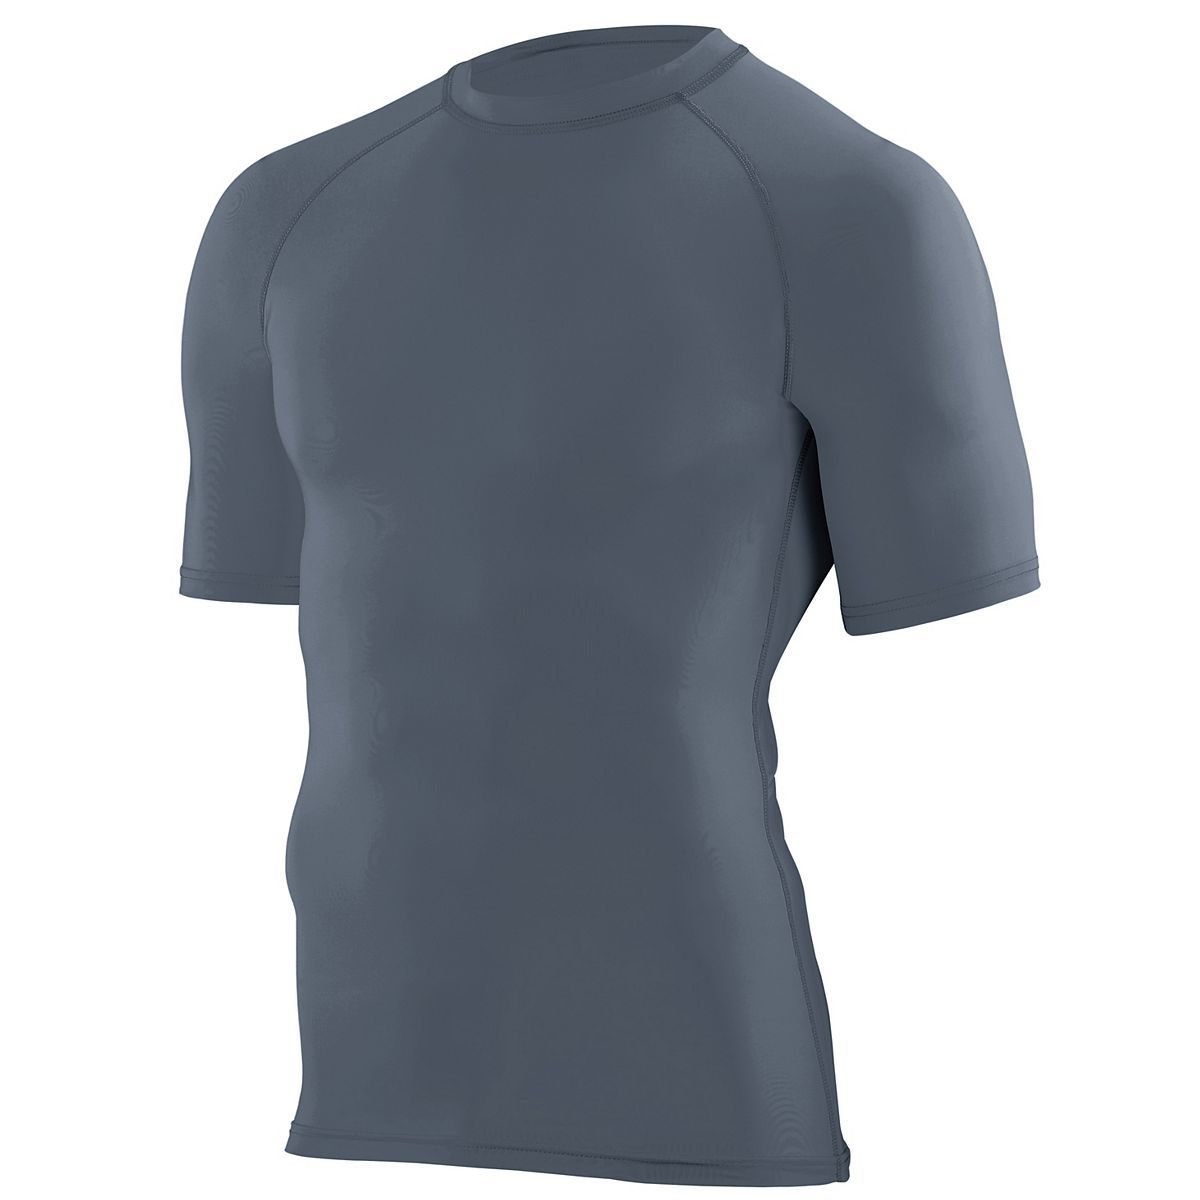 Augusta Sportswear Hyperform Compression Short Sleeve Tee in Graphite  -Part of the Adult, Adult-Tee-Shirt, T-Shirts, Augusta-Products, Shirts product lines at KanaleyCreations.com